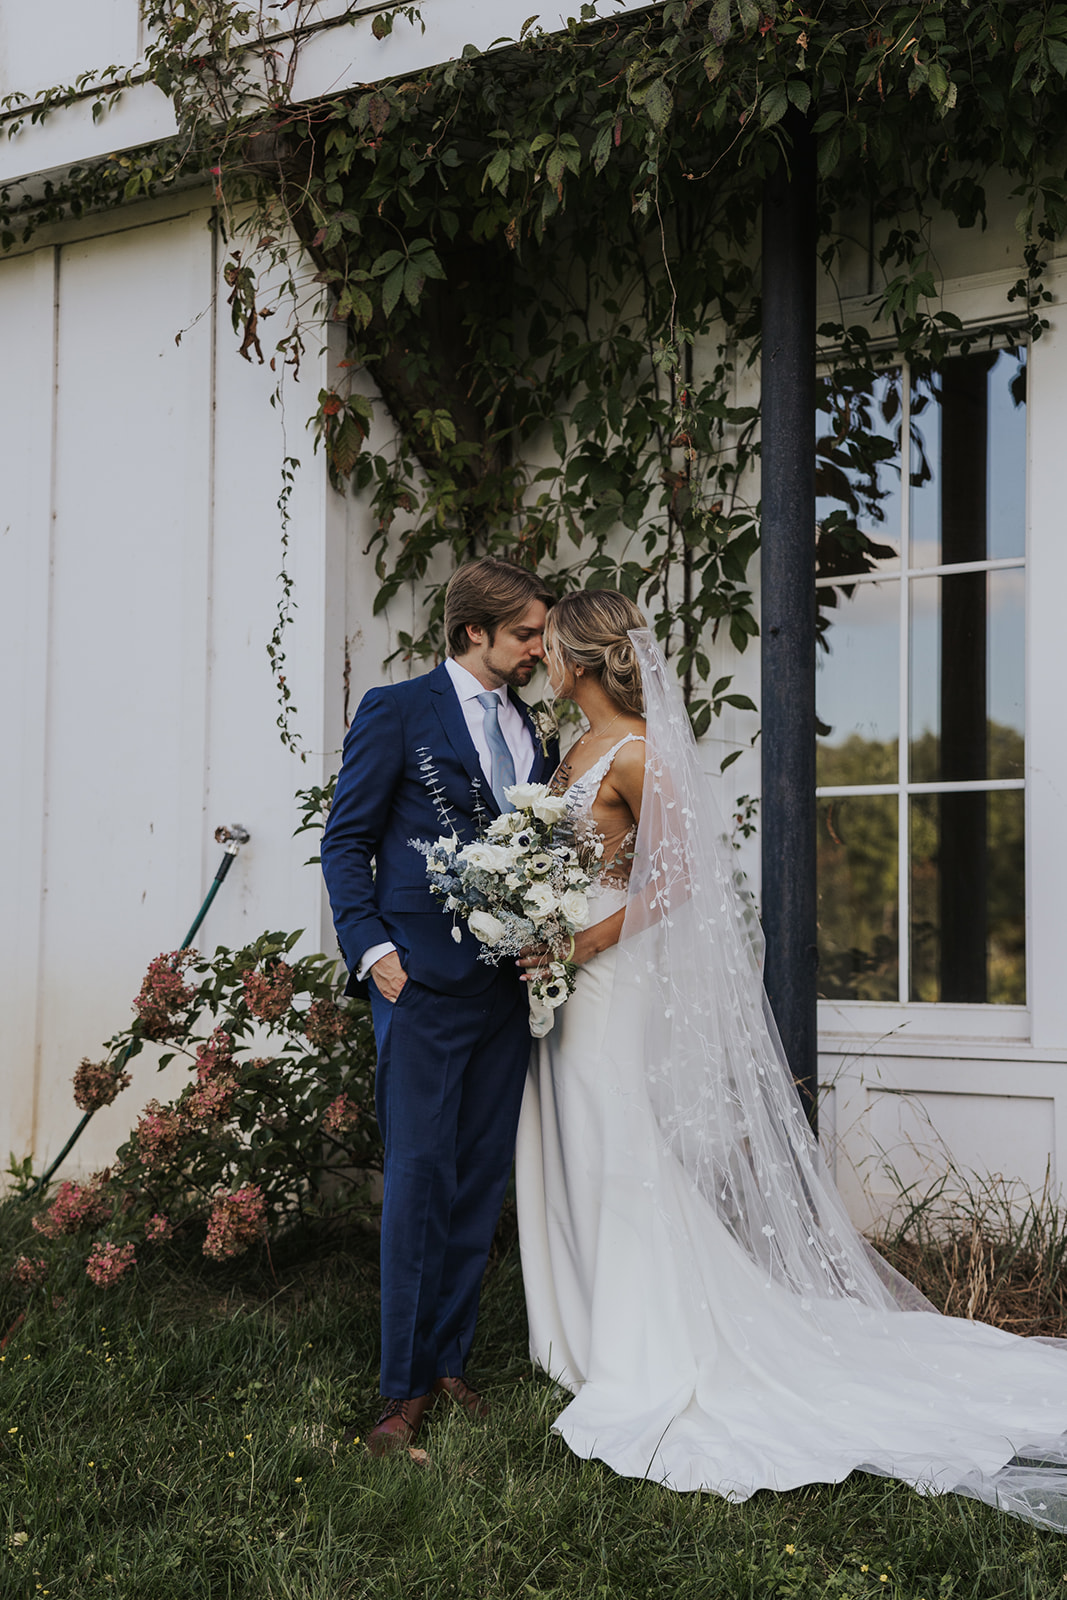 Stunning bride and groom share a kiss during their dreamy Georgia wedding